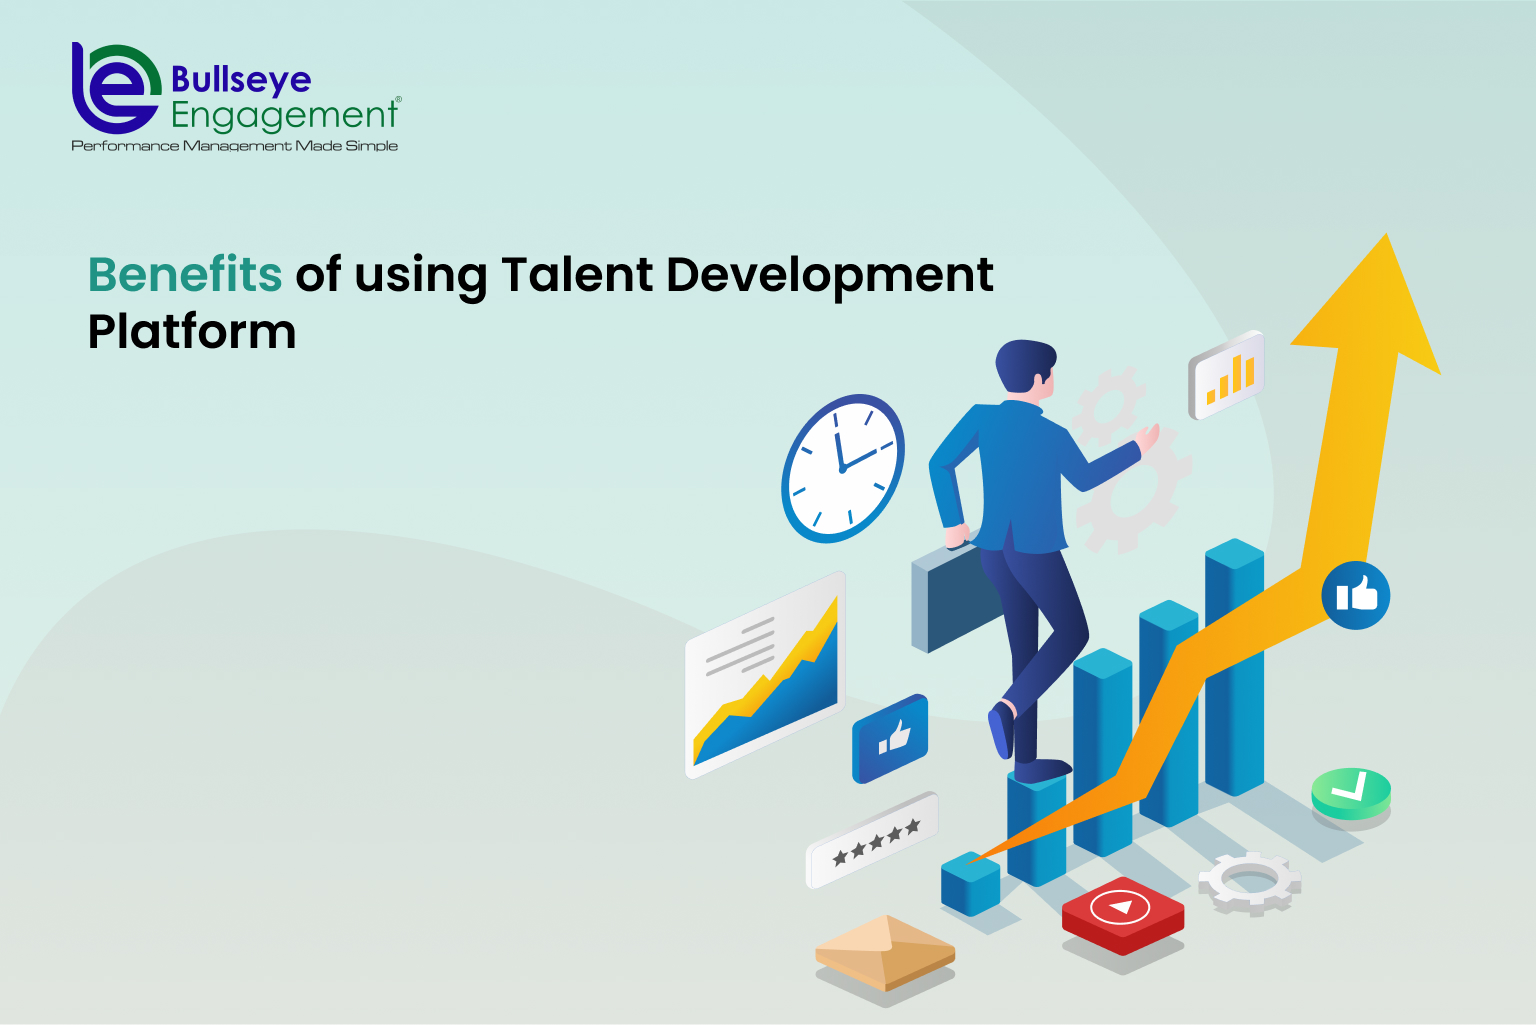 How to Use Talent Development Software to Upskill and Reskill Your Employees - BullseyeEngagement